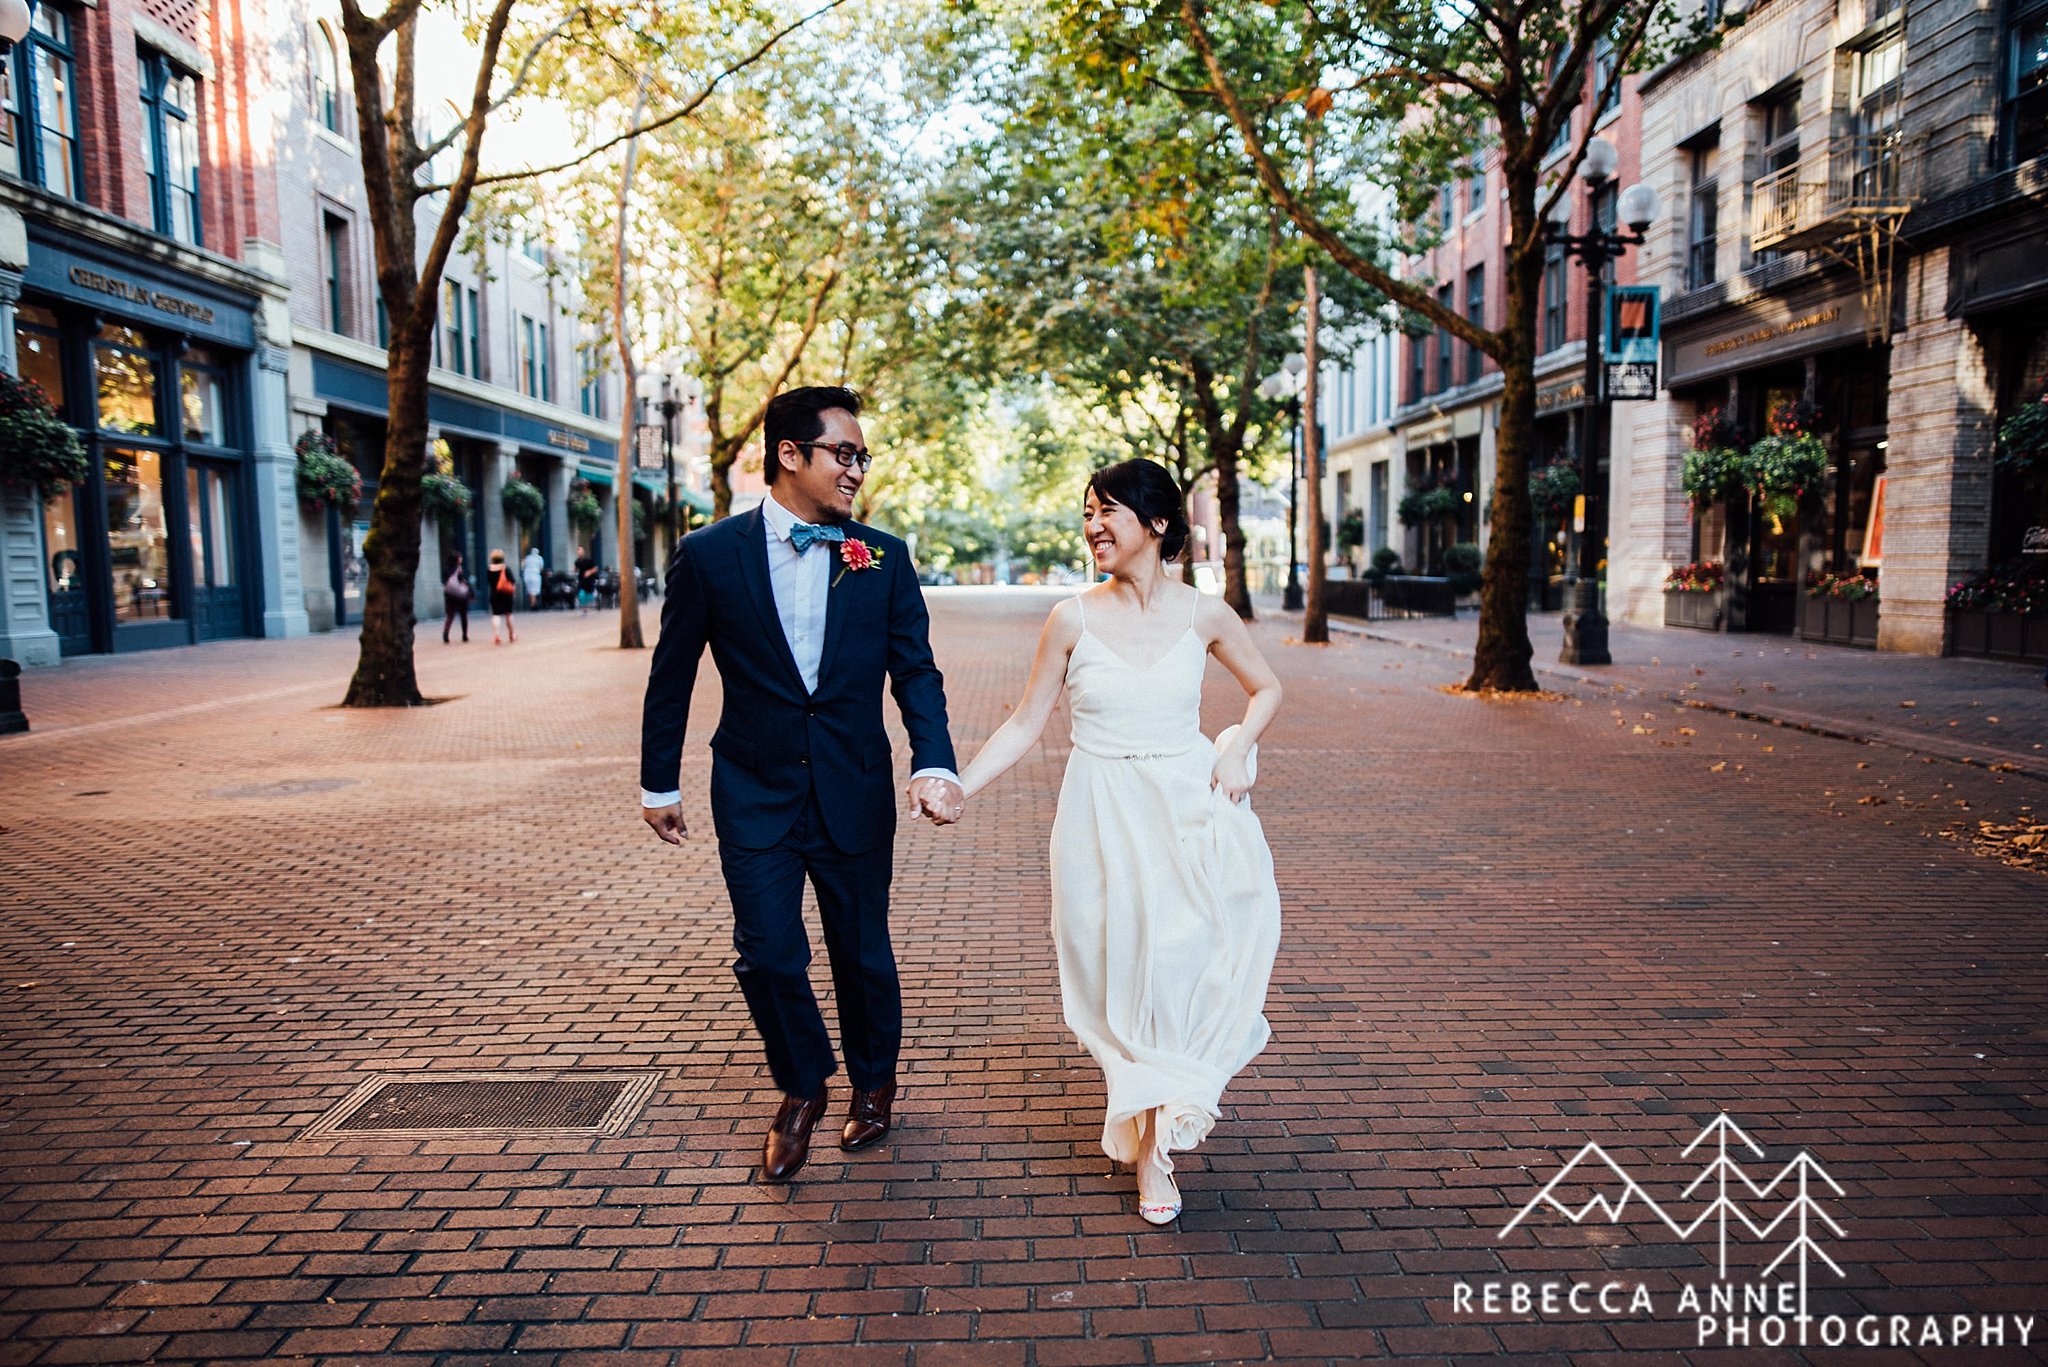 Downtown Seattle Courthouse Elopement,Downtown Seattle Elopement,Courthouse Wedding Photos,Downtown Seattle Wedding Photos,Seattle Wedding Photographer,Seattle Elopement Photographer,Seattle Wedding Photography,Seattle Elopement Photography,